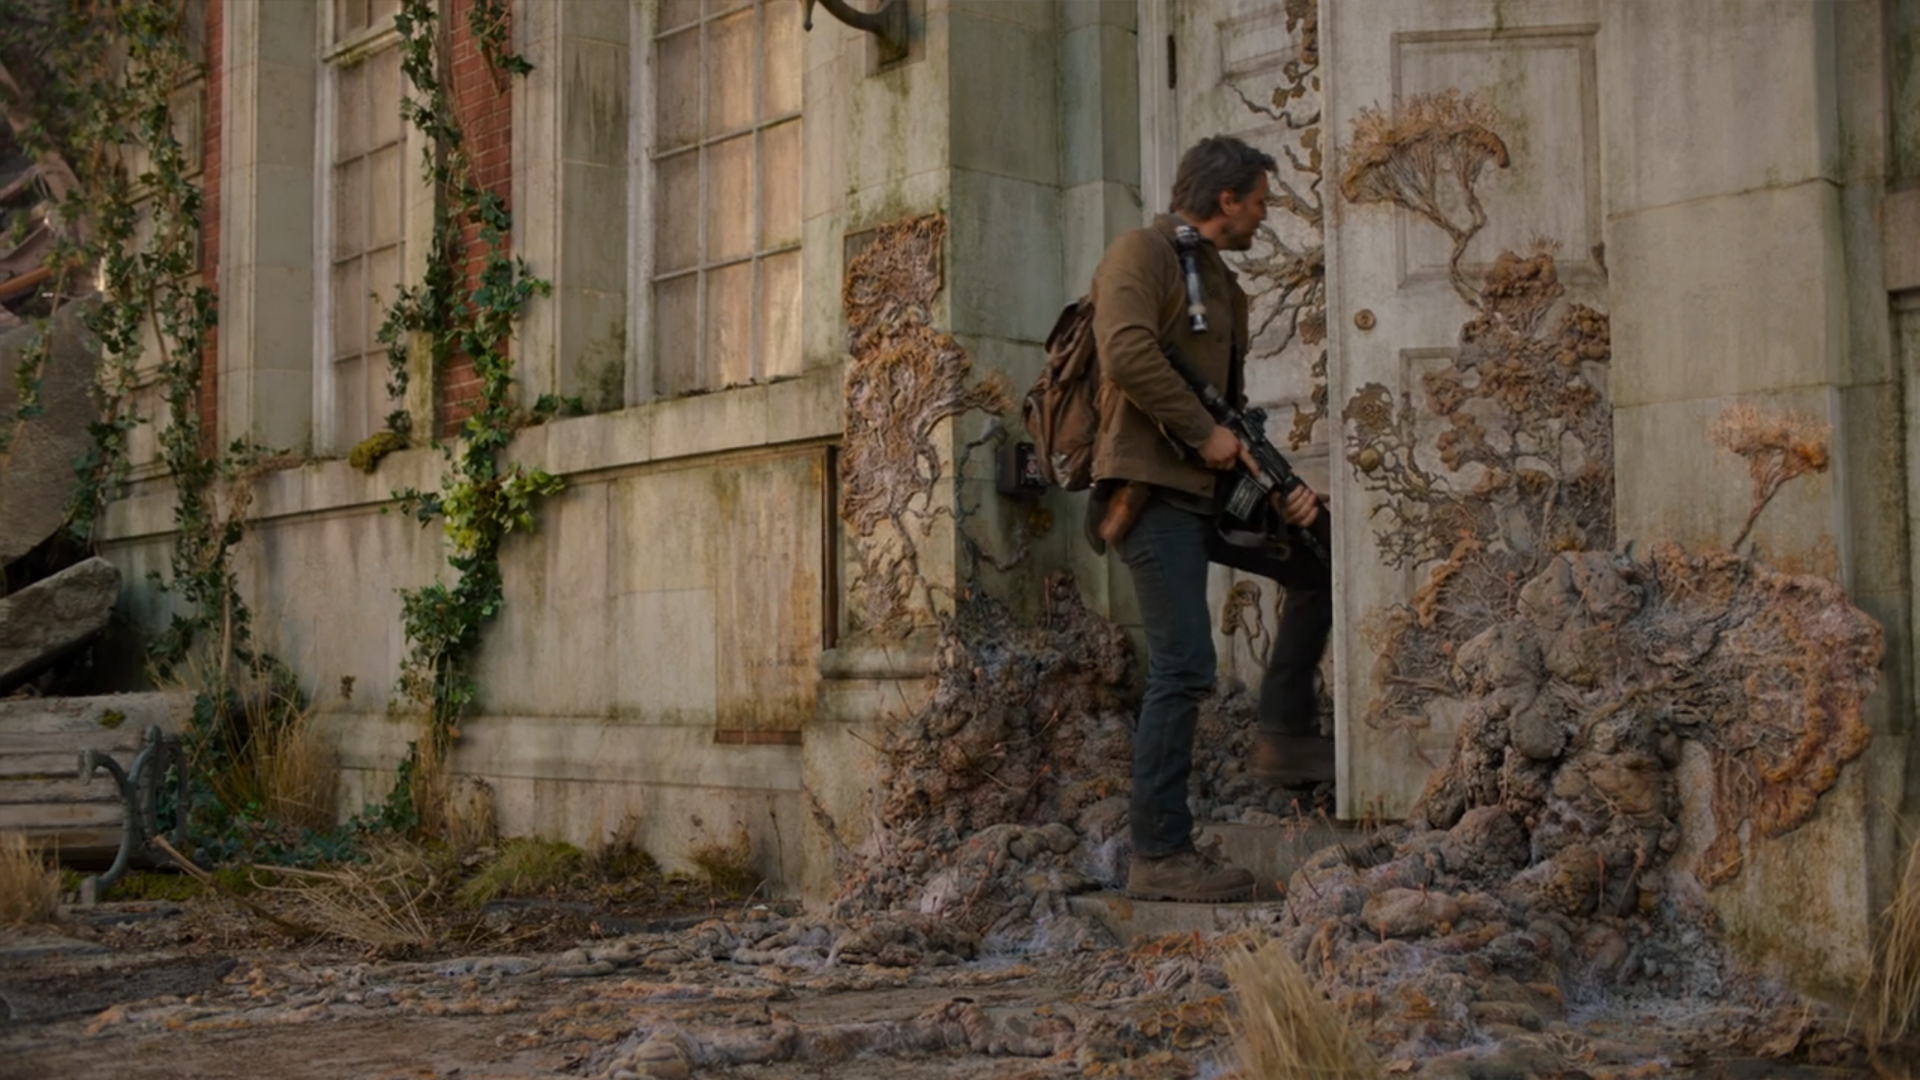 The Last Of Us Zombie Fungus Causes A Pandemic. Could It Happen?